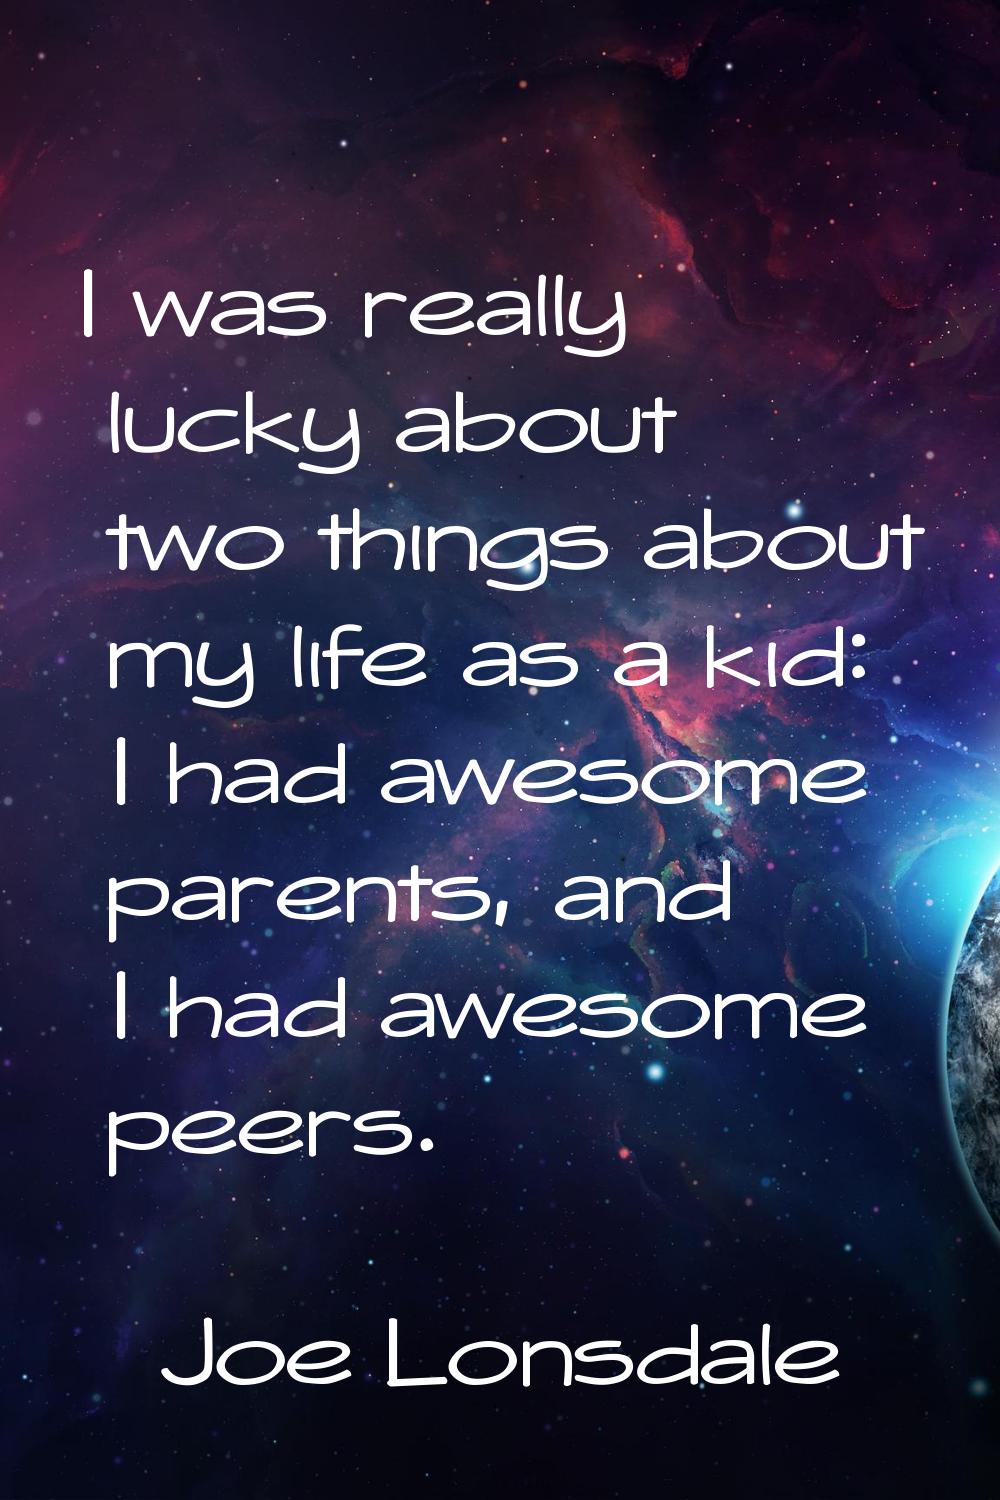 I was really lucky about two things about my life as a kid: I had awesome parents, and I had awesom